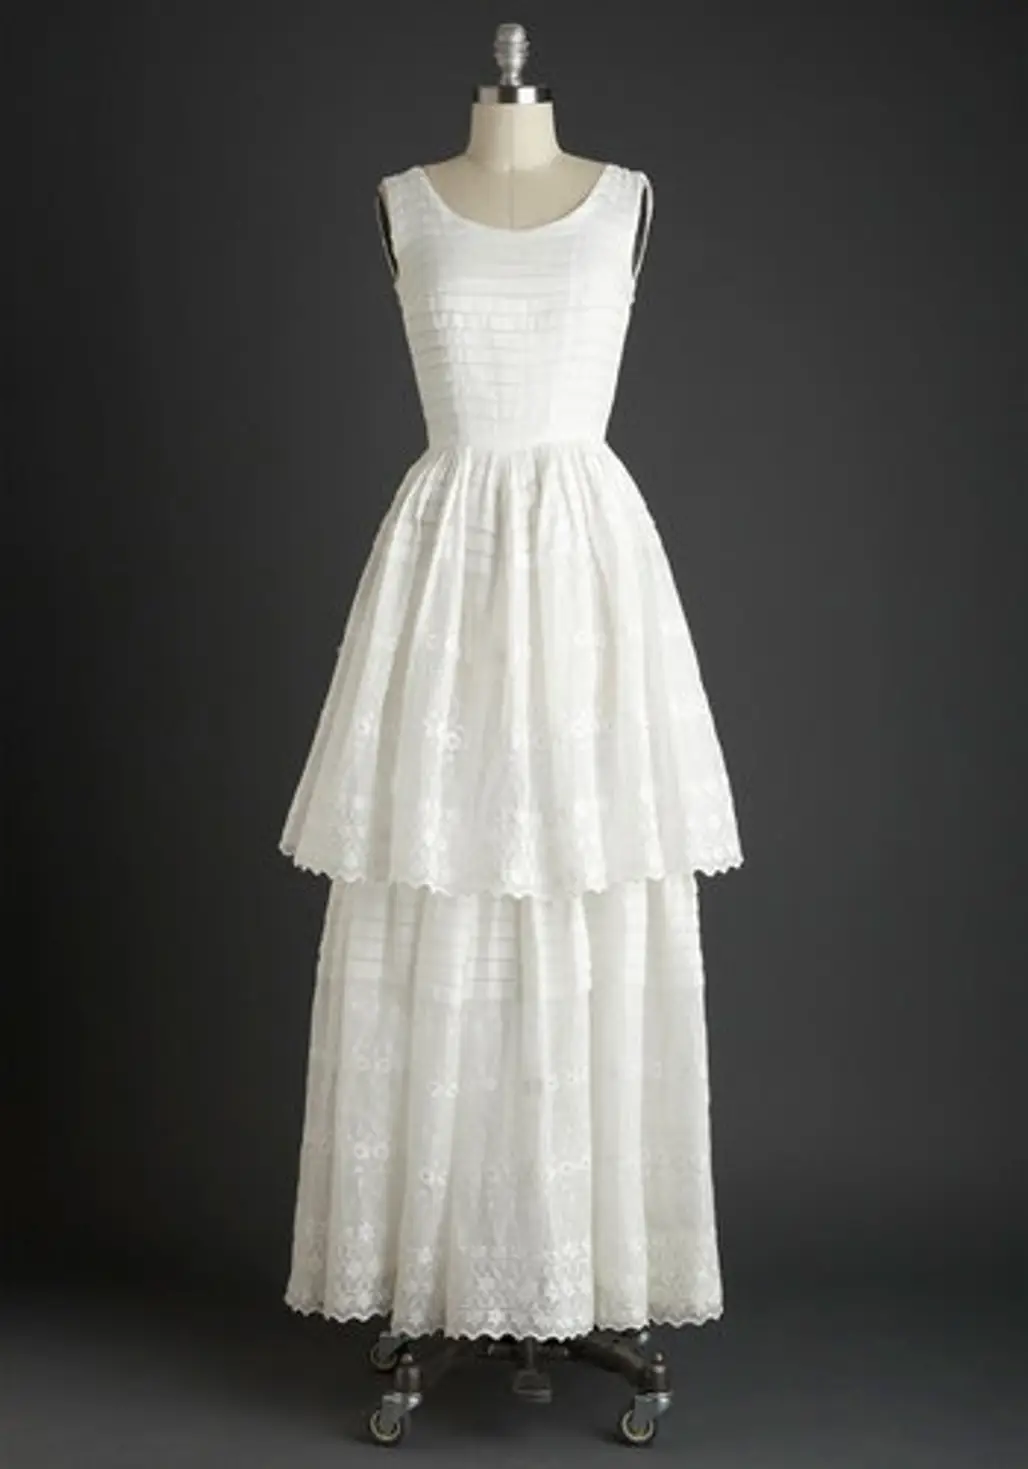 Two-Tiered Vintage Wedding Dress...